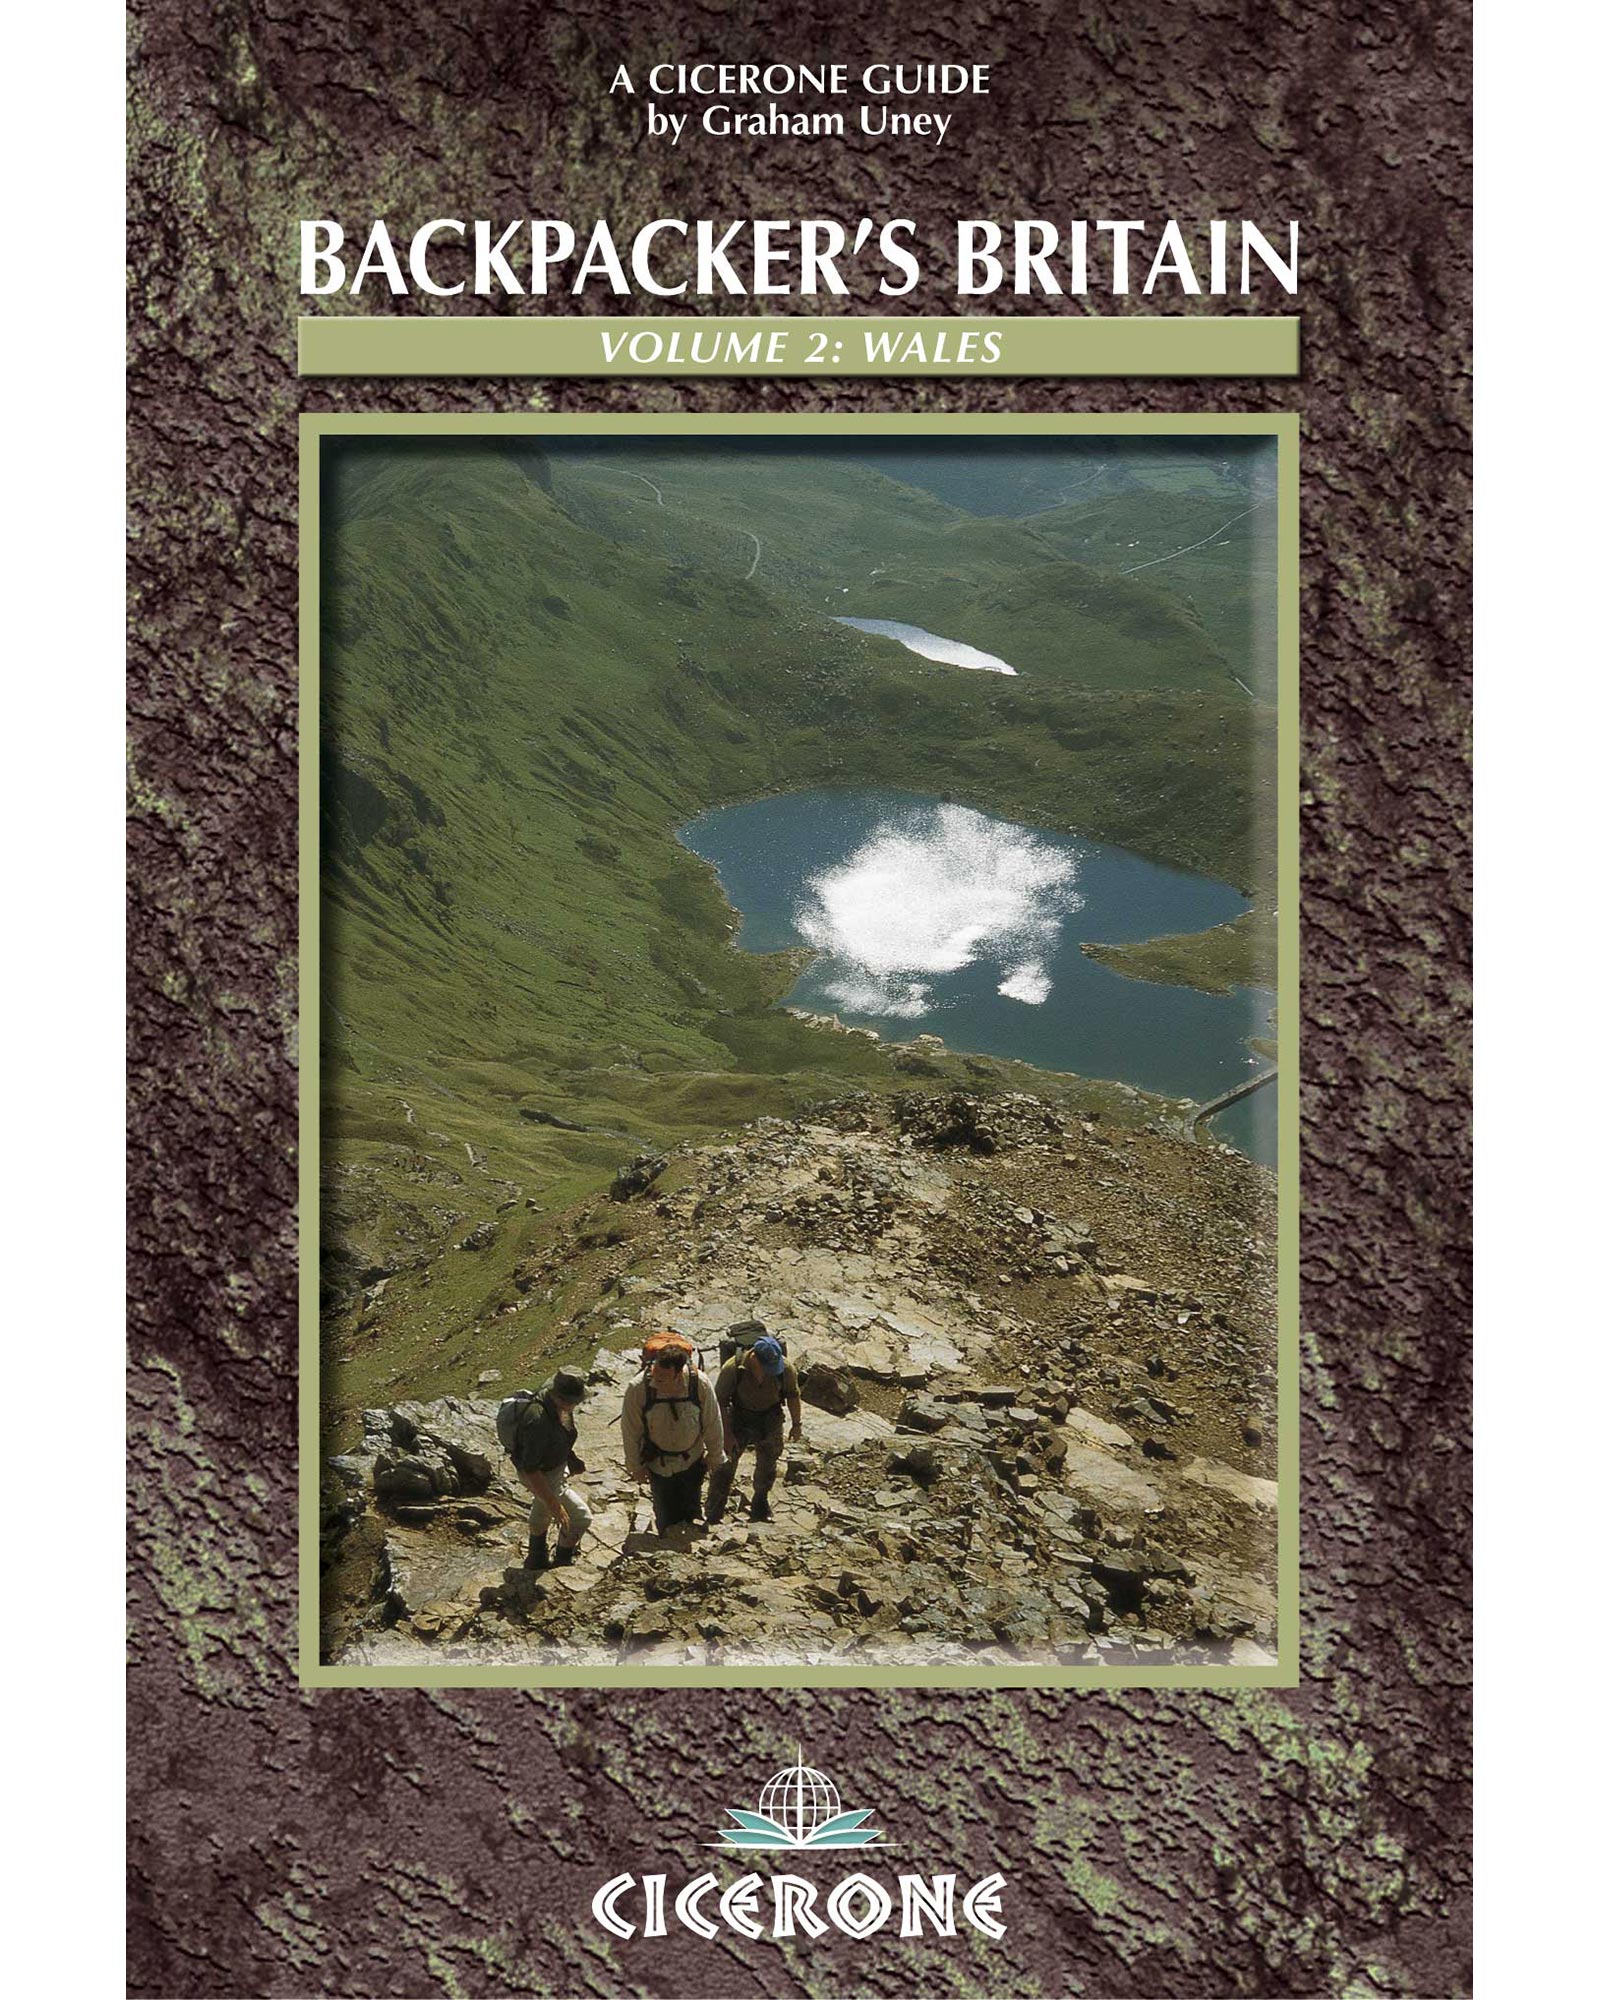 Cicerone Backpacker’s Britain Wales Guide Book